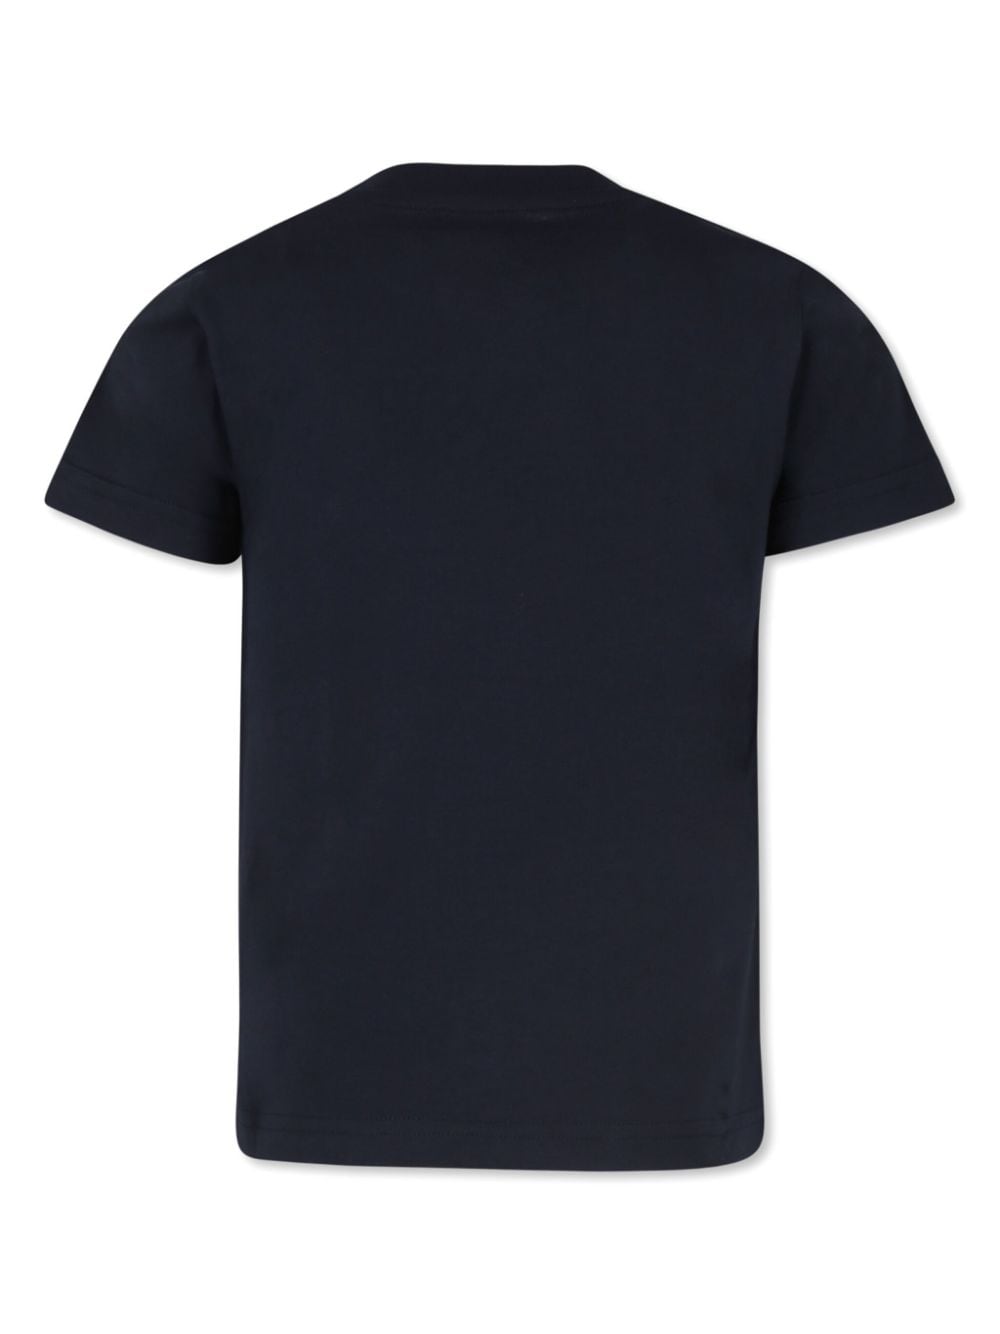 Navy blue cotton t-shirt for boys